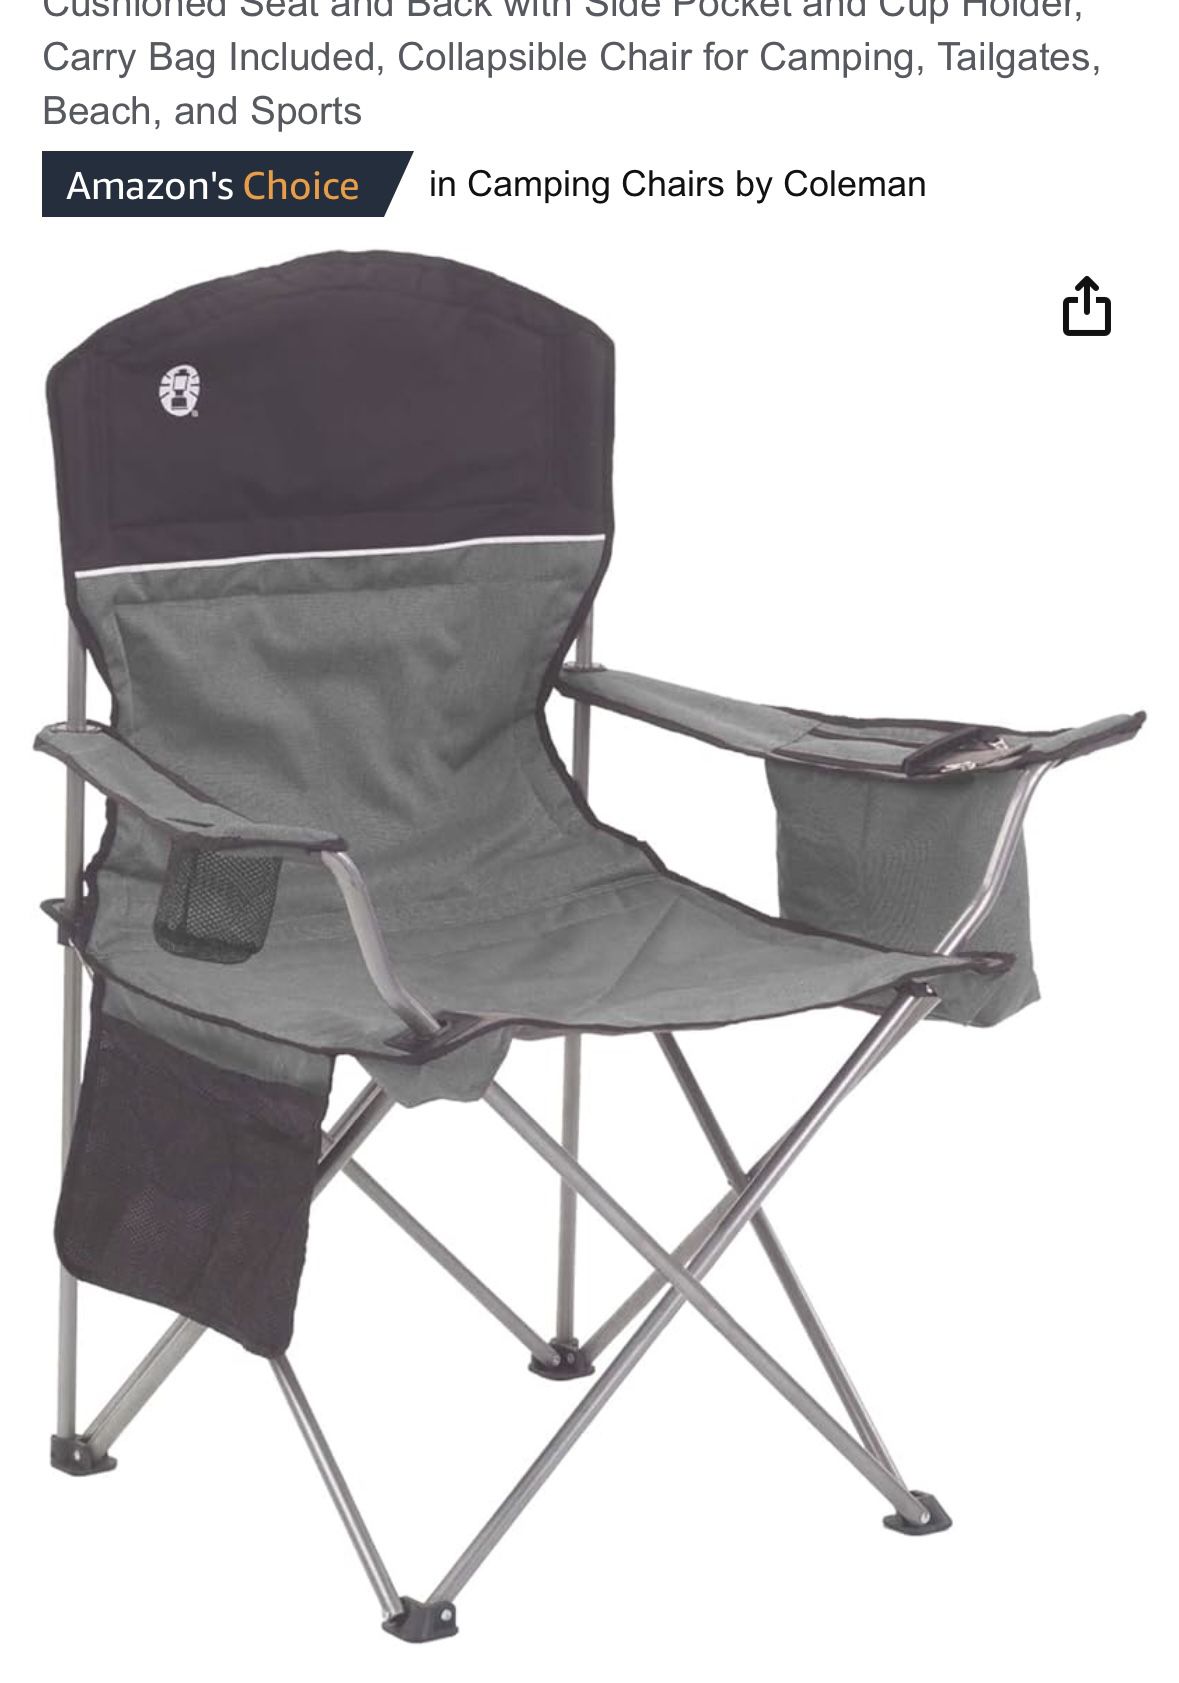 Coleman Camping Chair grey